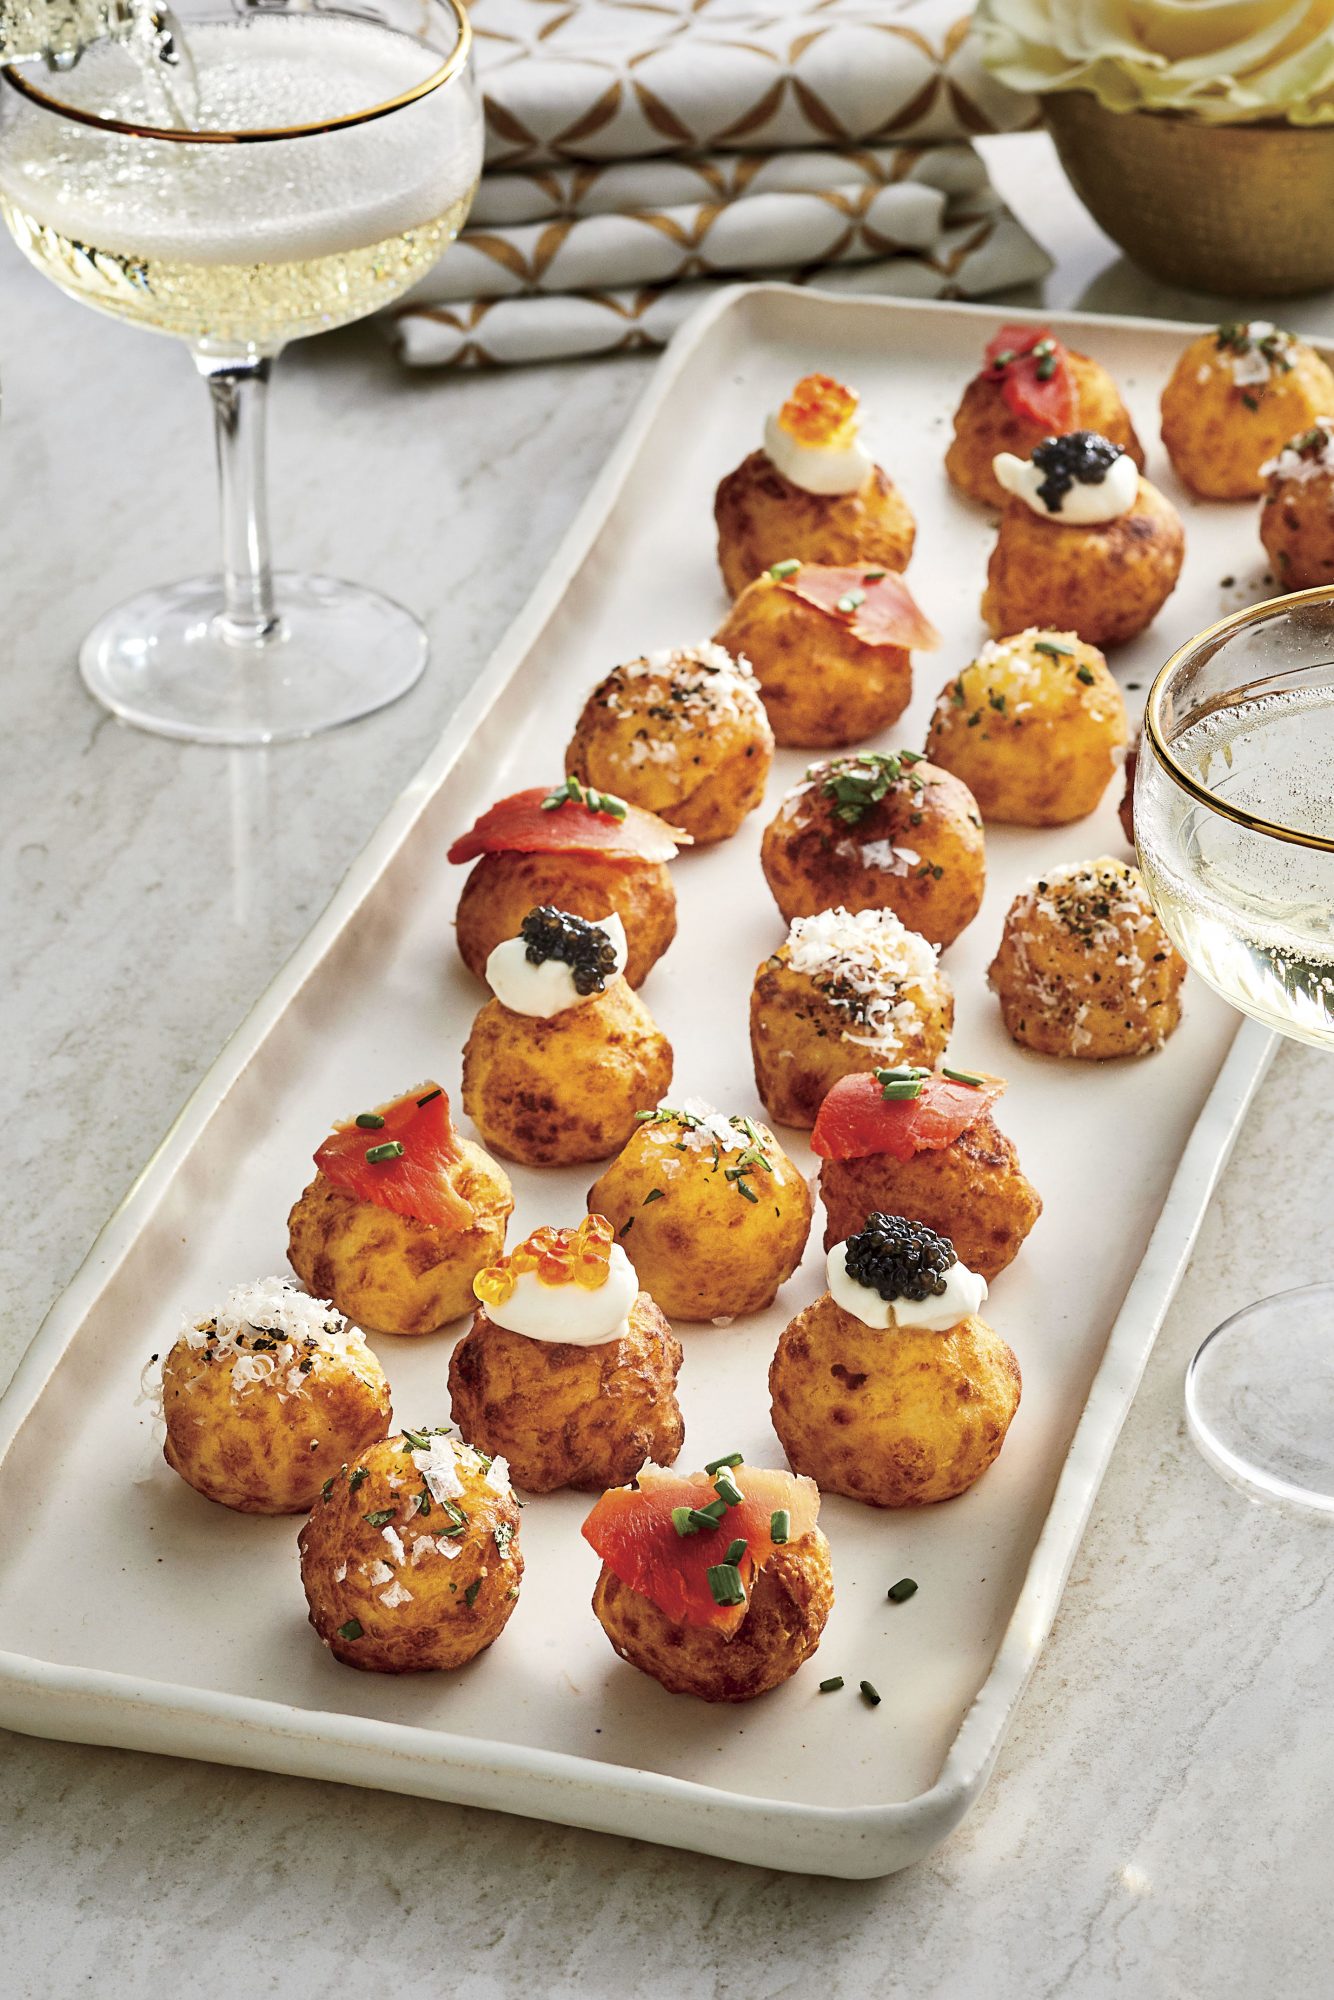 Potato Puffs with Toppings